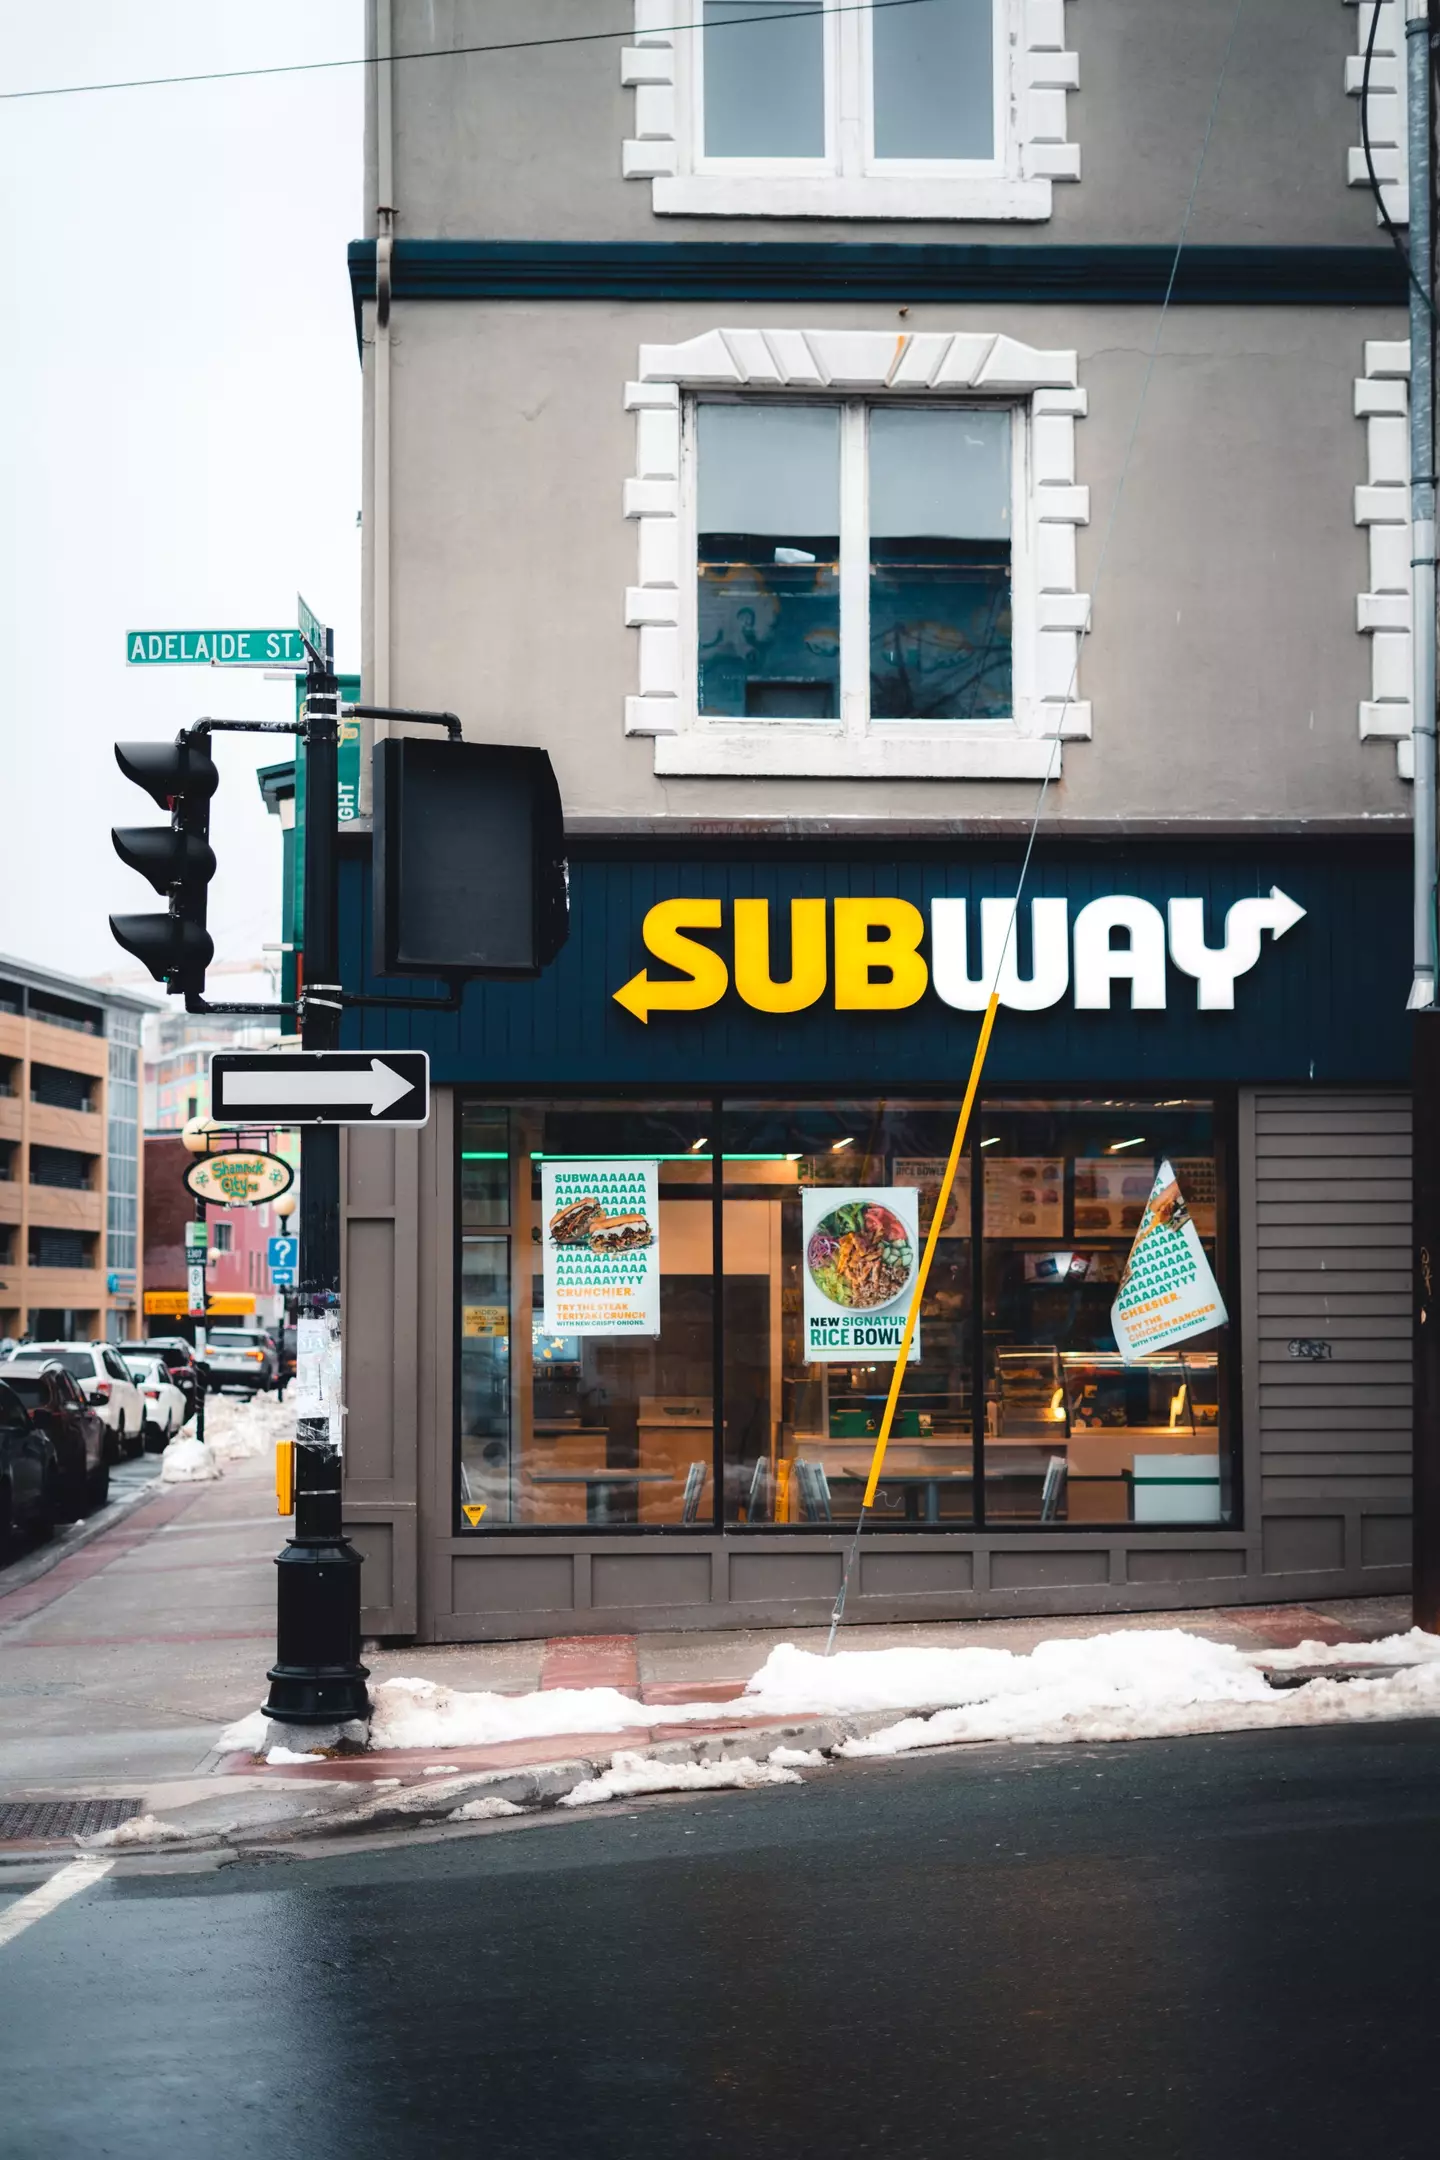 Subway is expected to install self-service kiosks.